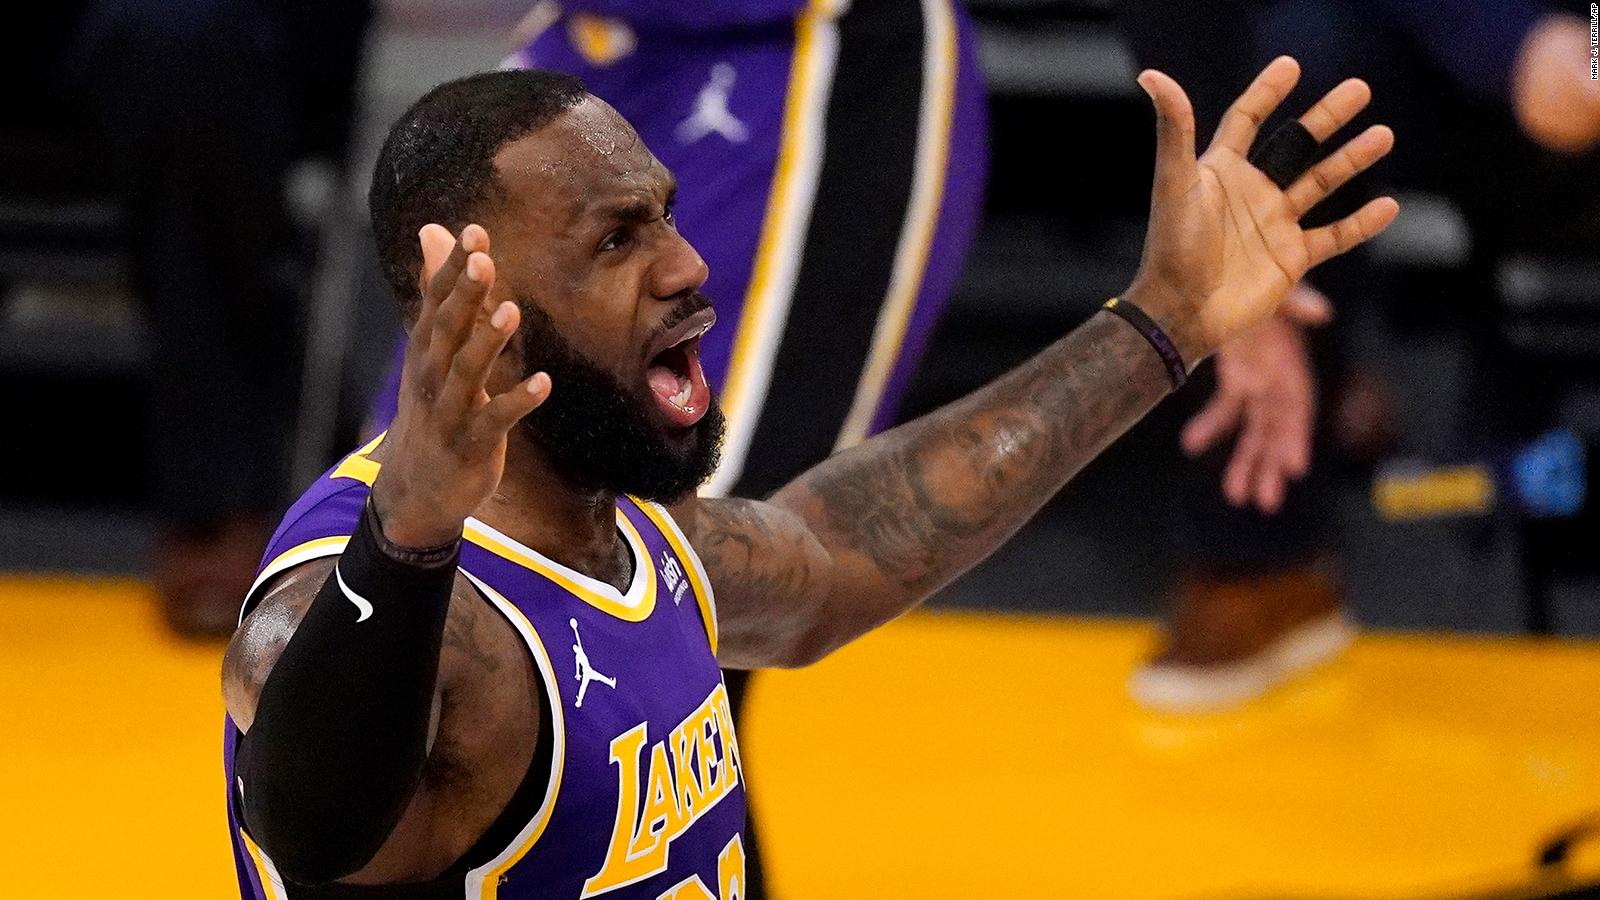 LeBron James breaks NBA record for most career turnovers CNN